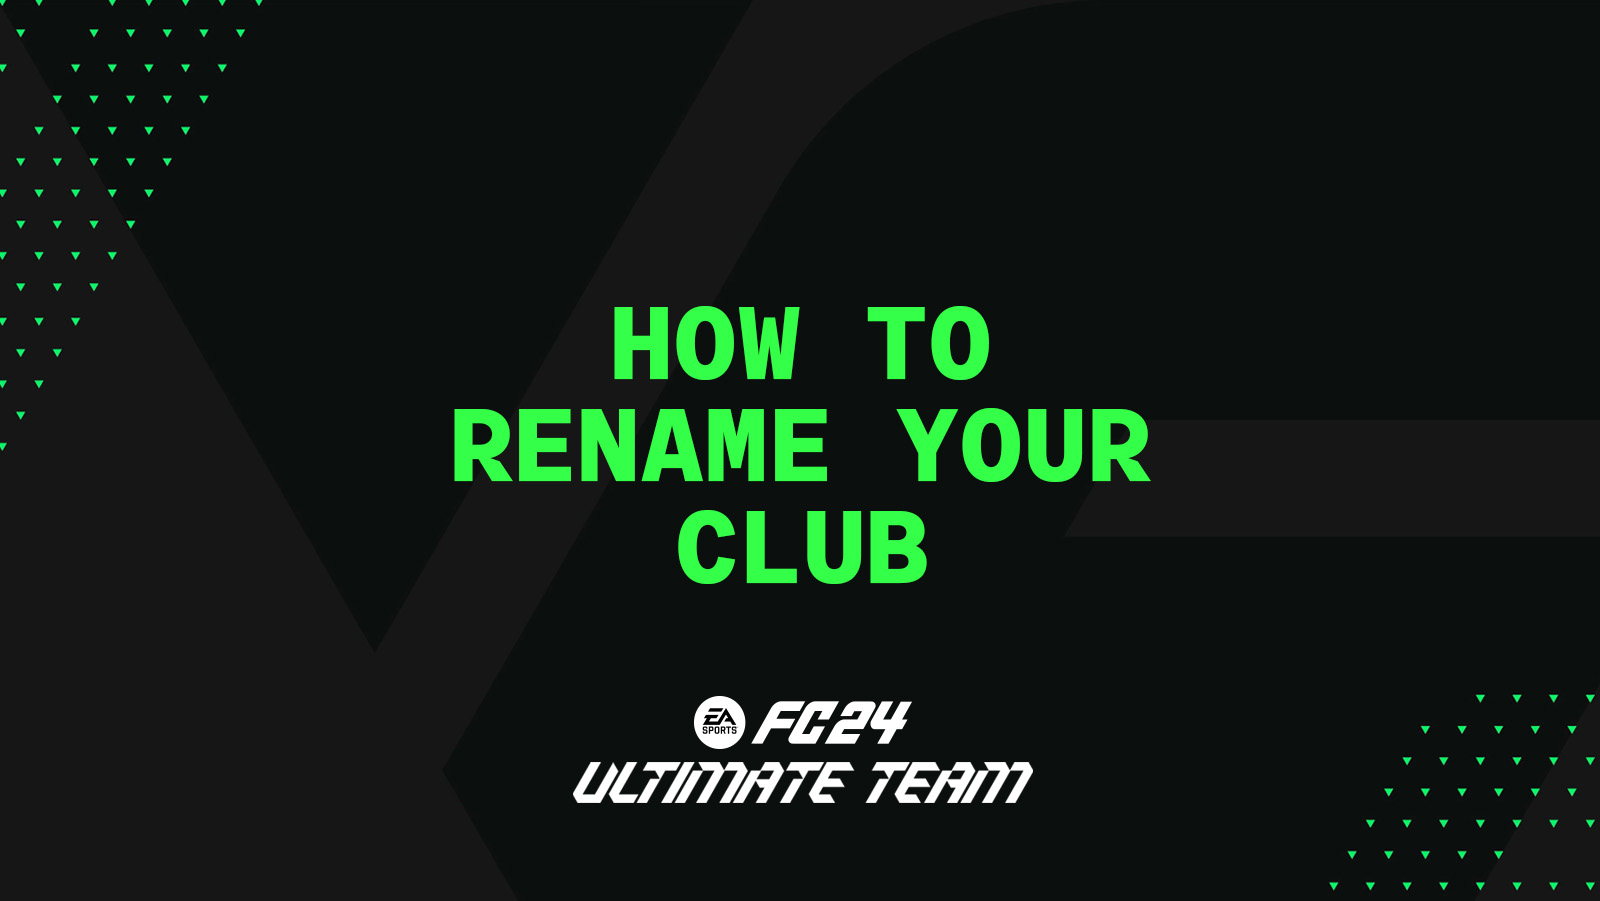 FC 24 Ultimate Team - Rename Your Club